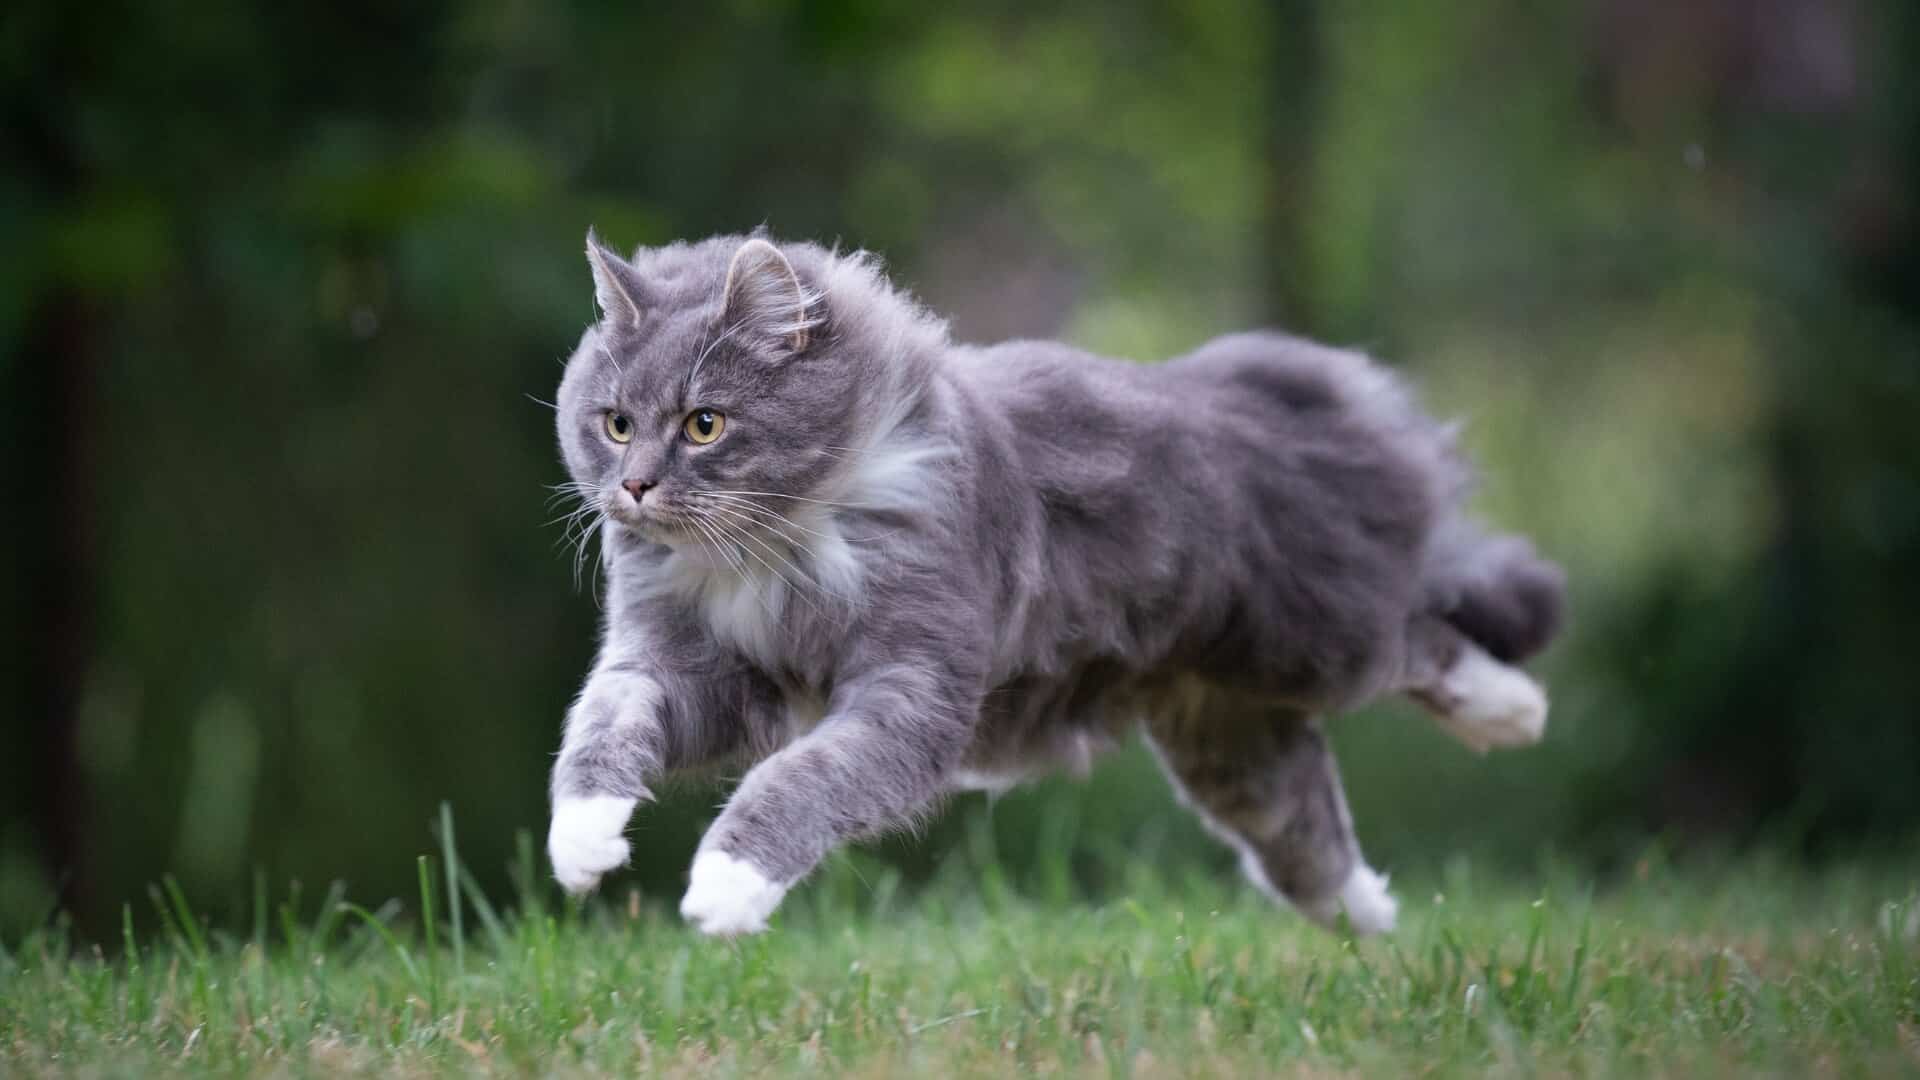 cat running fast outdoors nils jacobi getty images